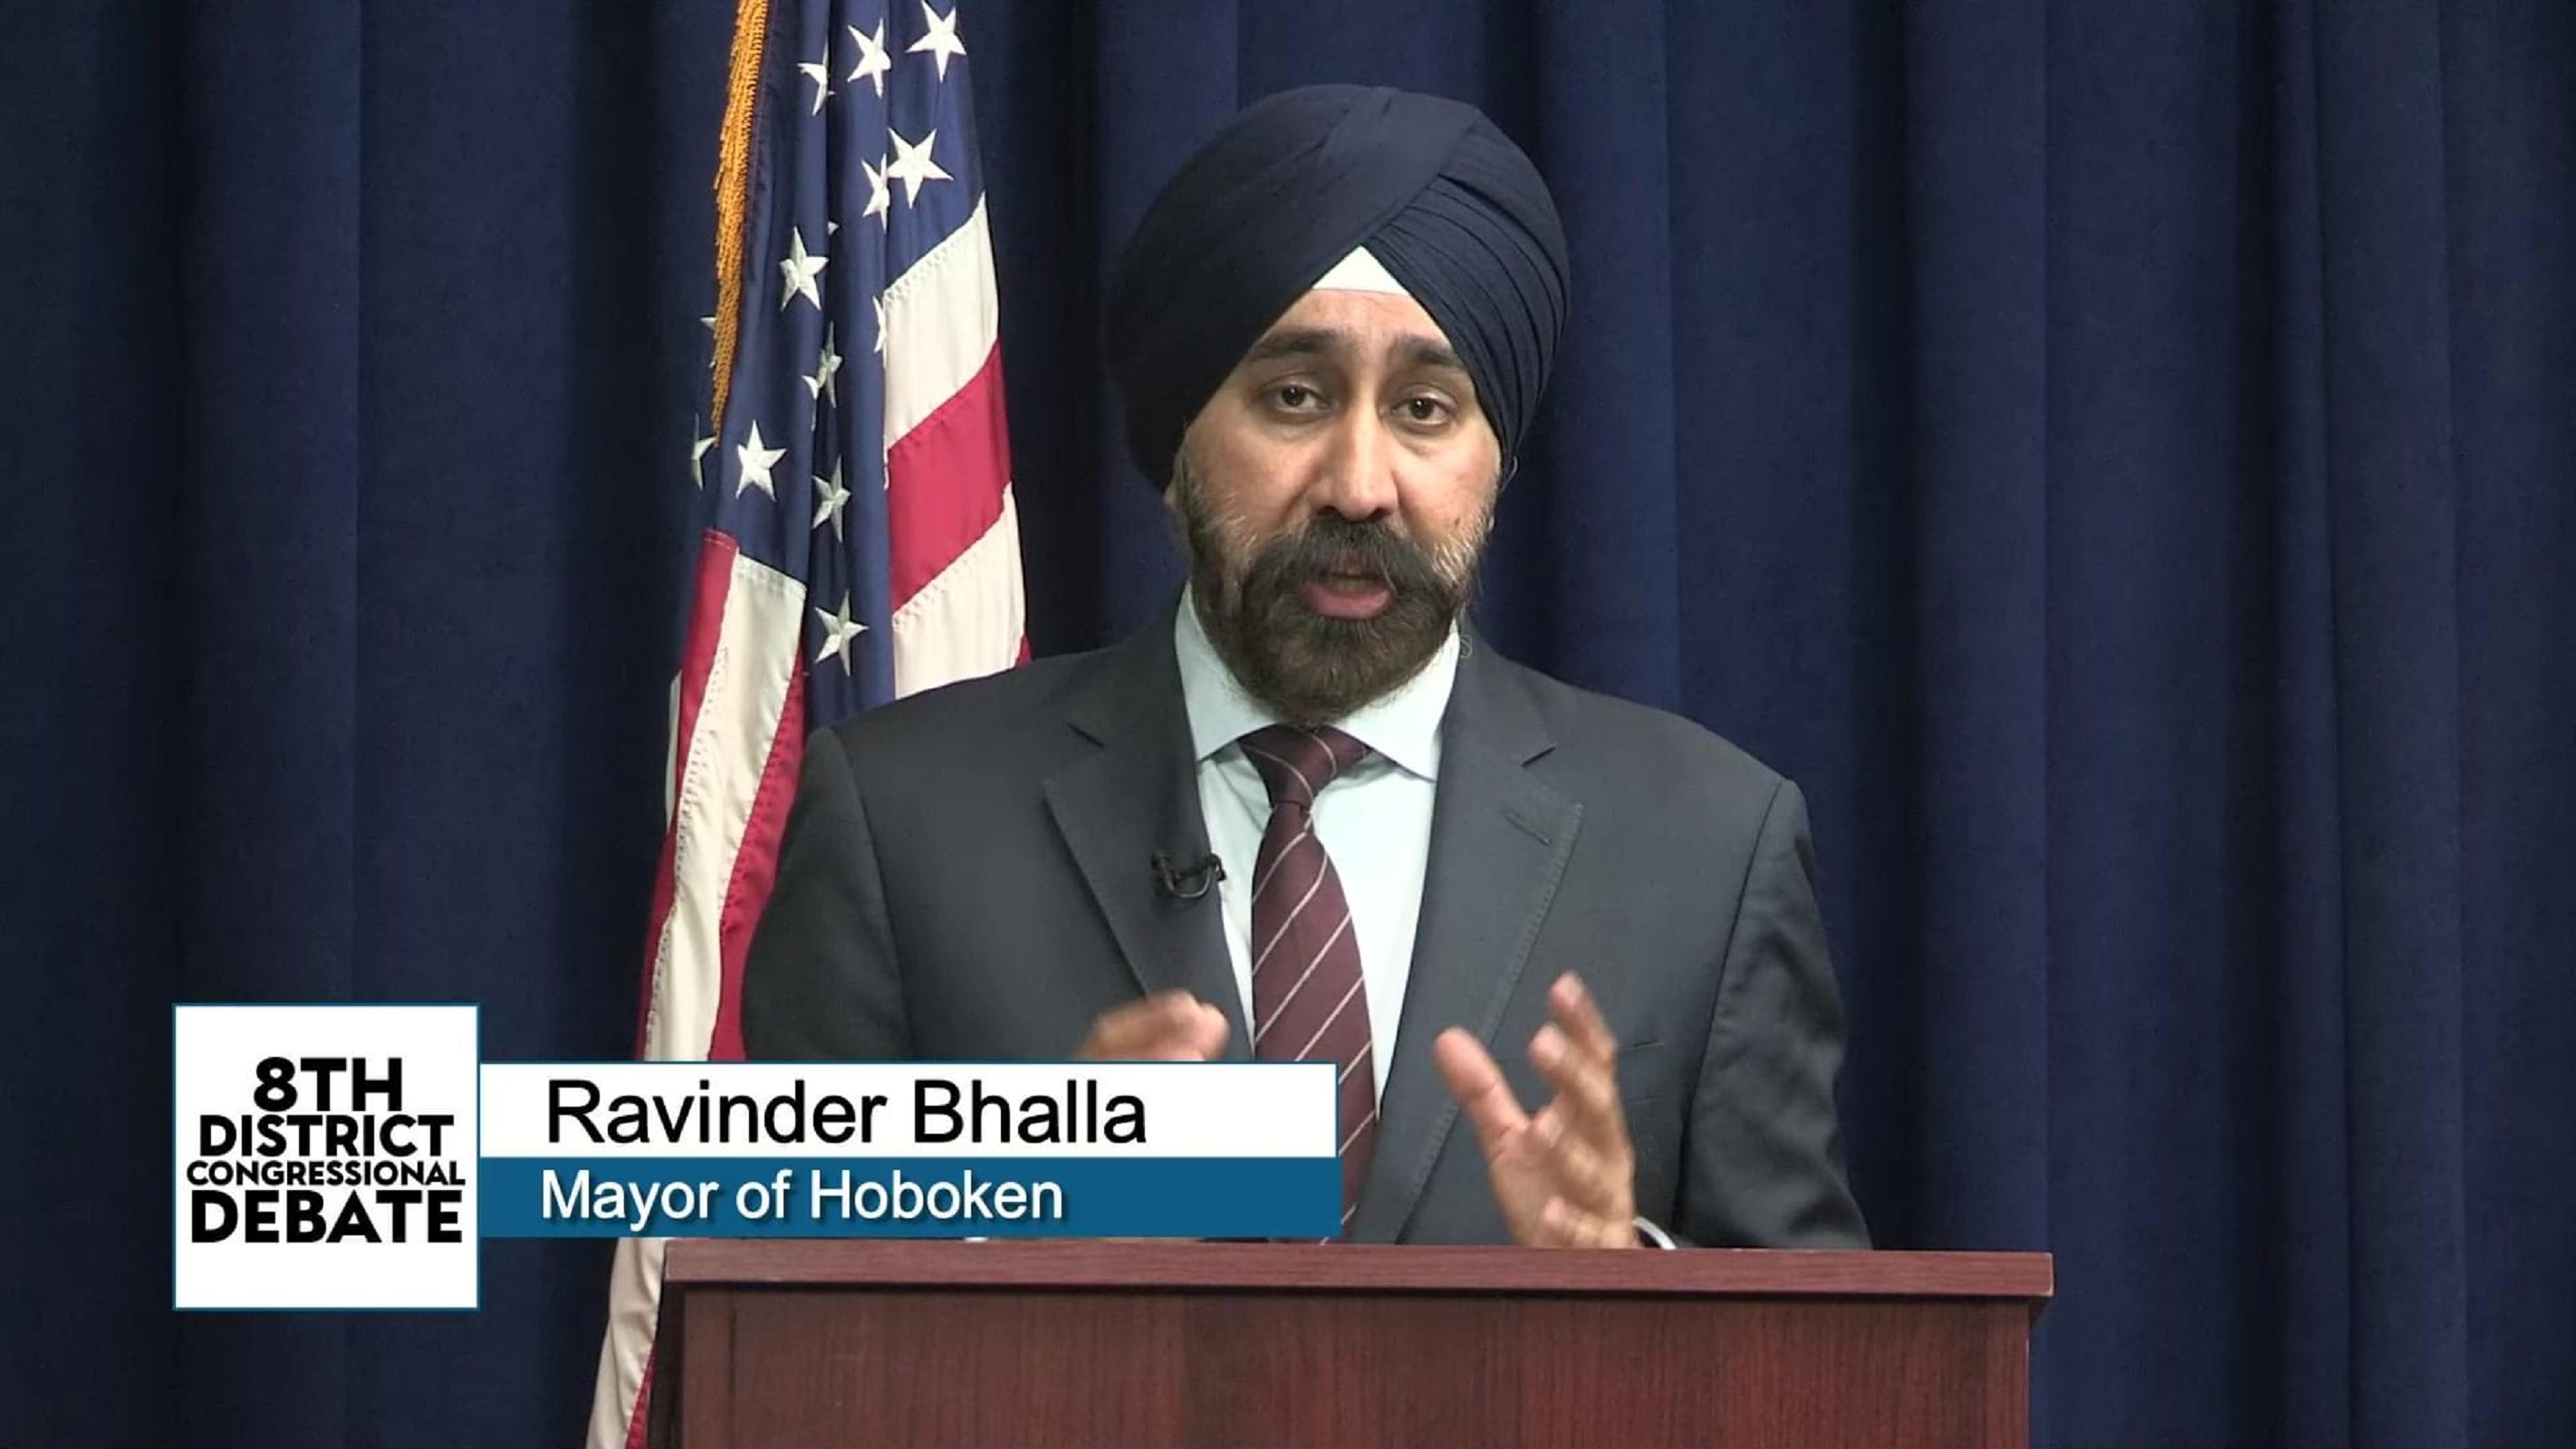 The Democratic primary in New Jersey is on June 4th, which sees Hoboken Mayor Ravi Bhalla challenge U.S. Rep. Rob Menend...